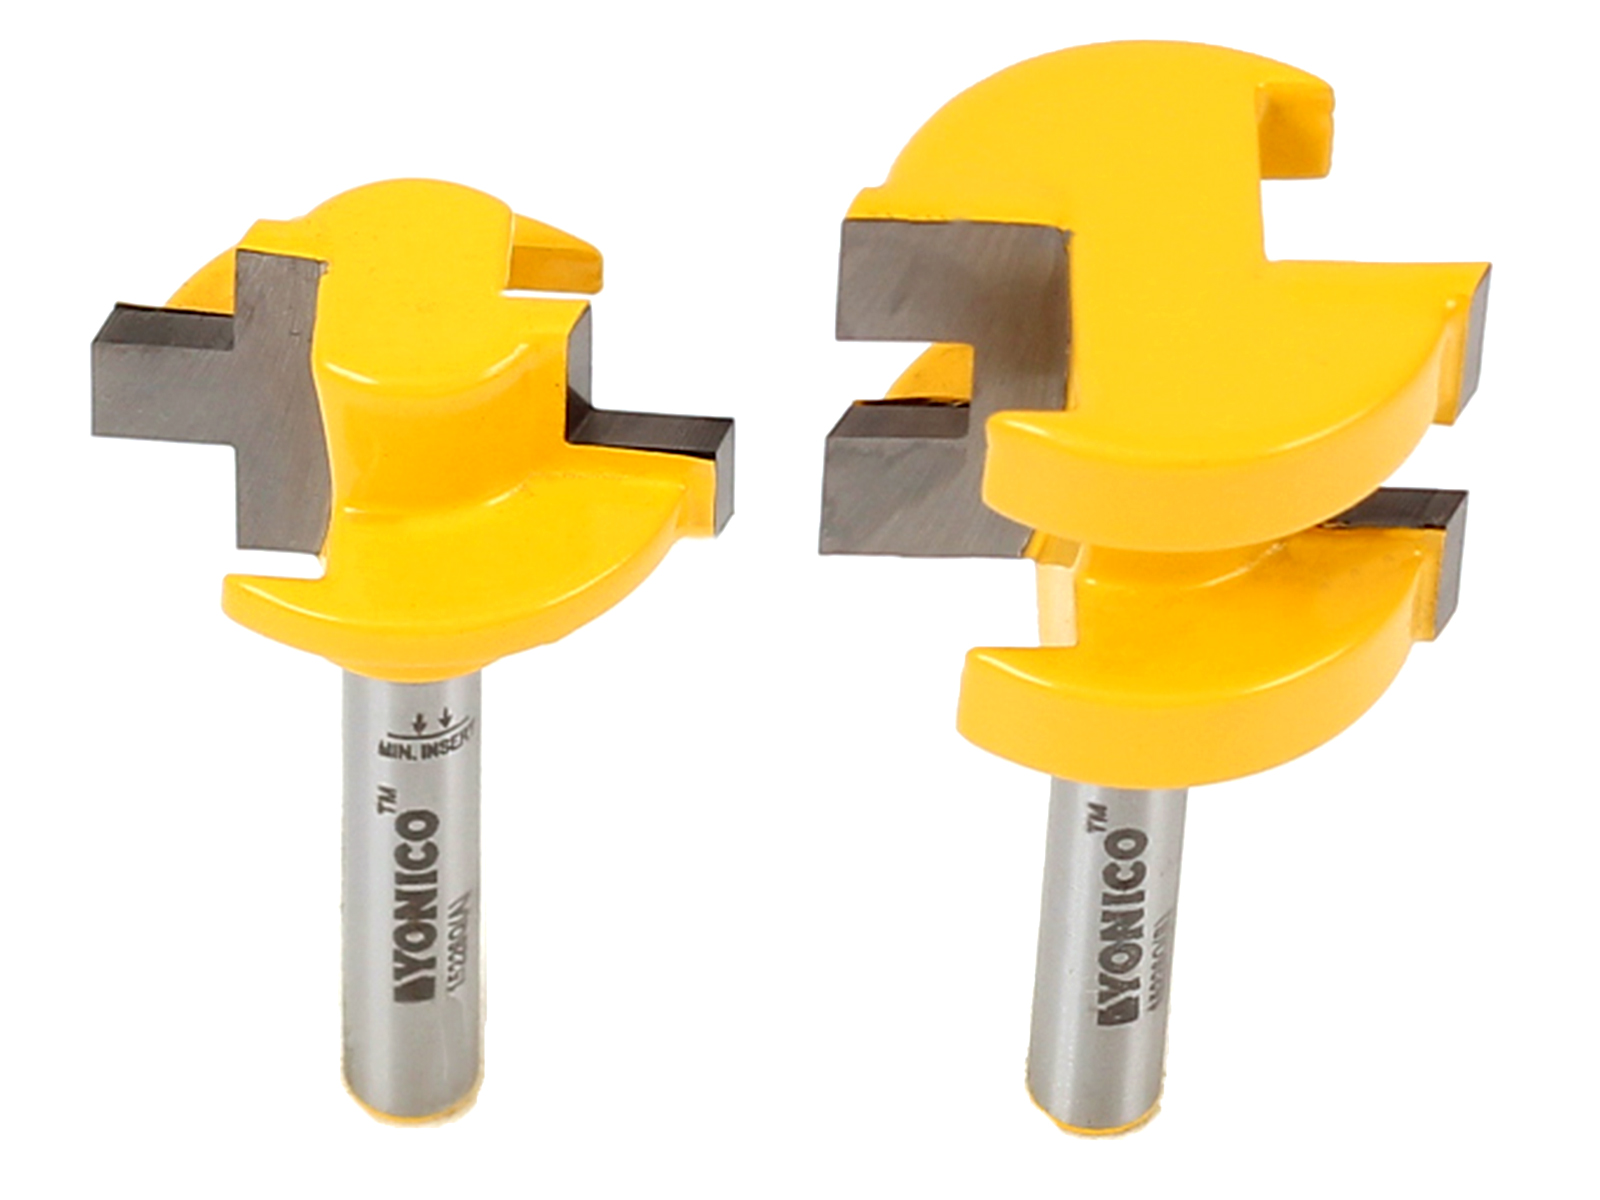 1 8 tongue and groove router bit